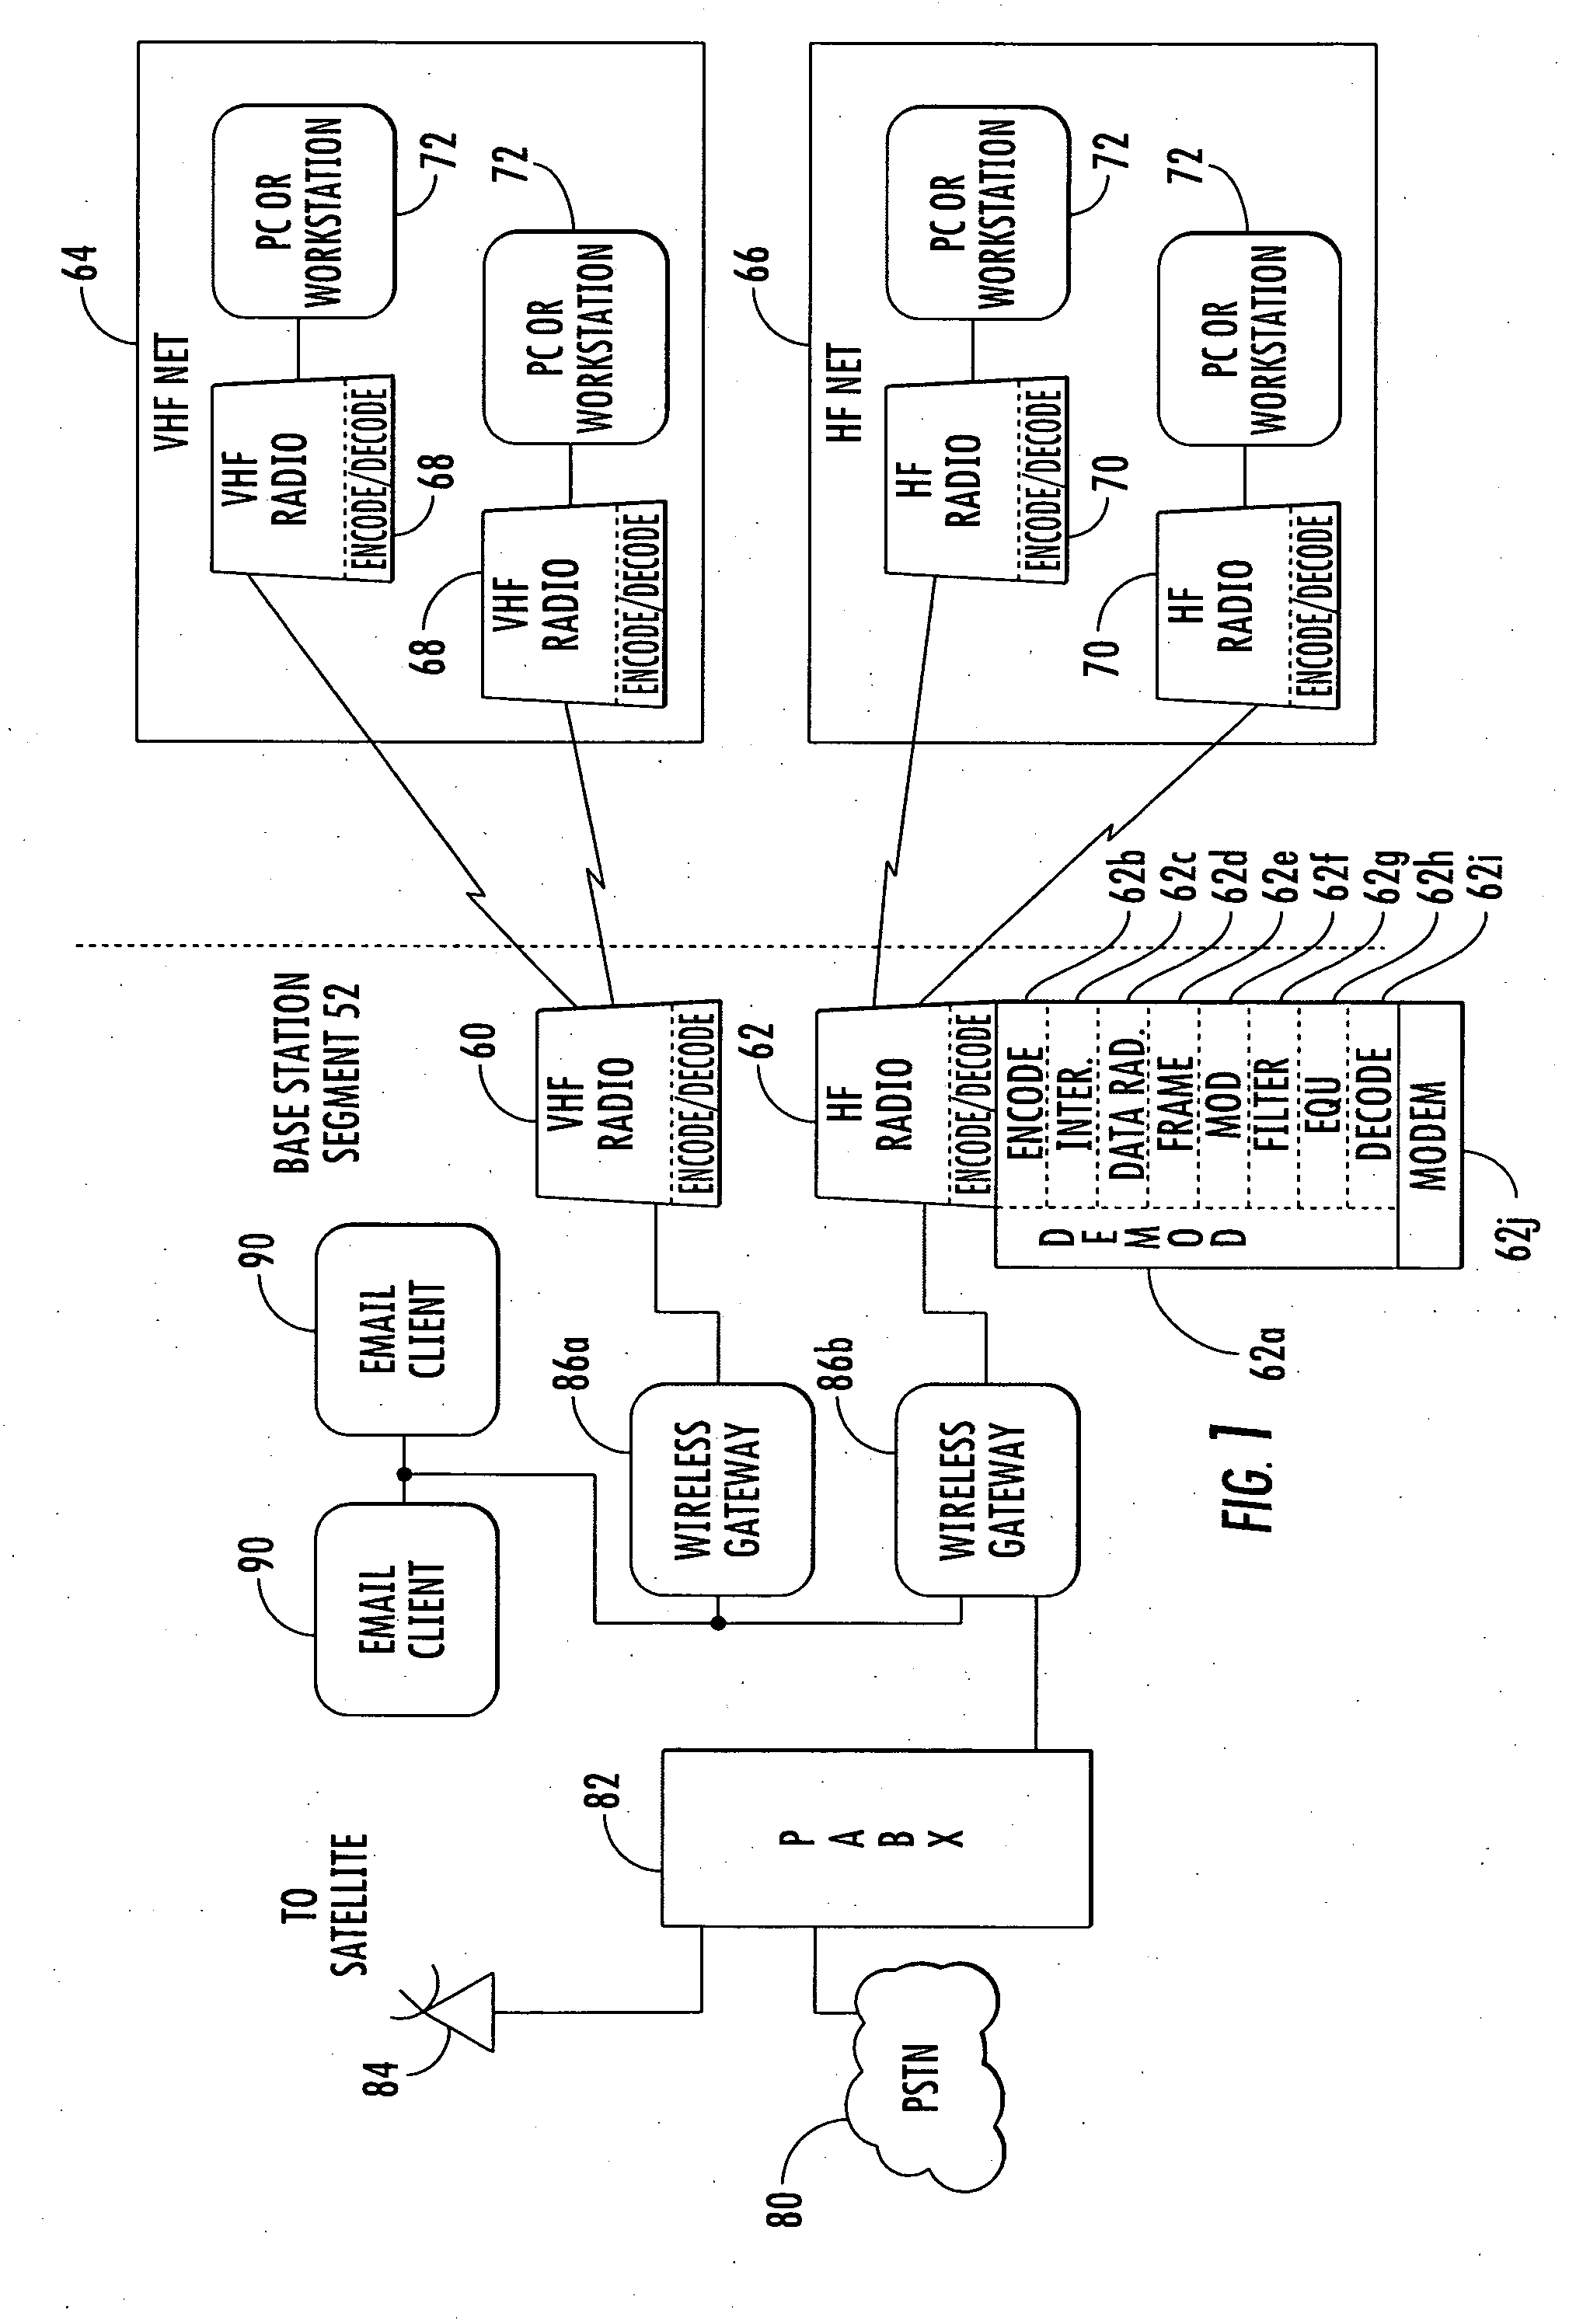 System and method for communicating data using constant amplitude equalized waveform